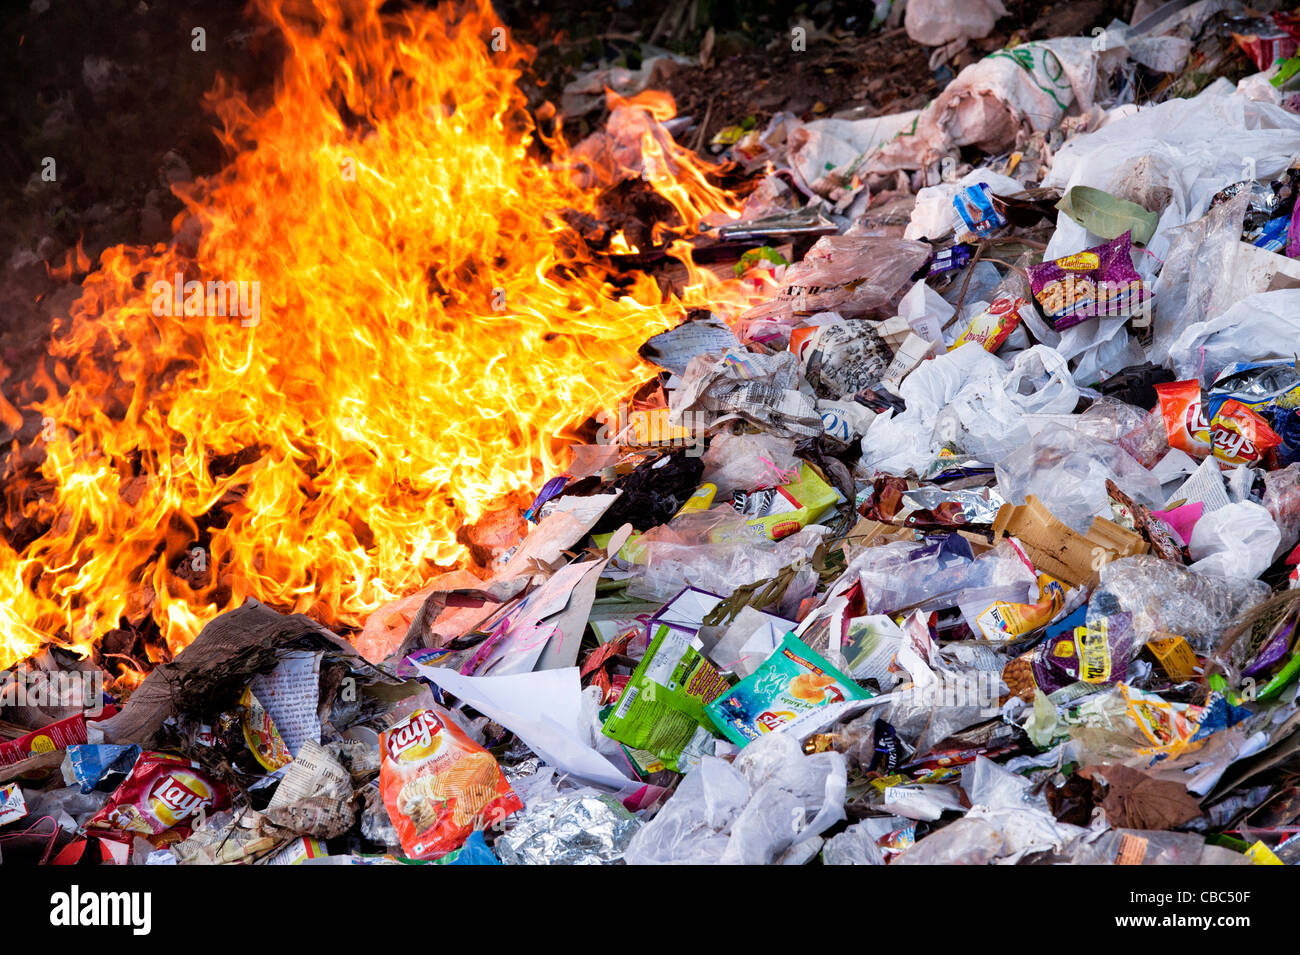 Burning household waste in the indian countryside Stock Photo